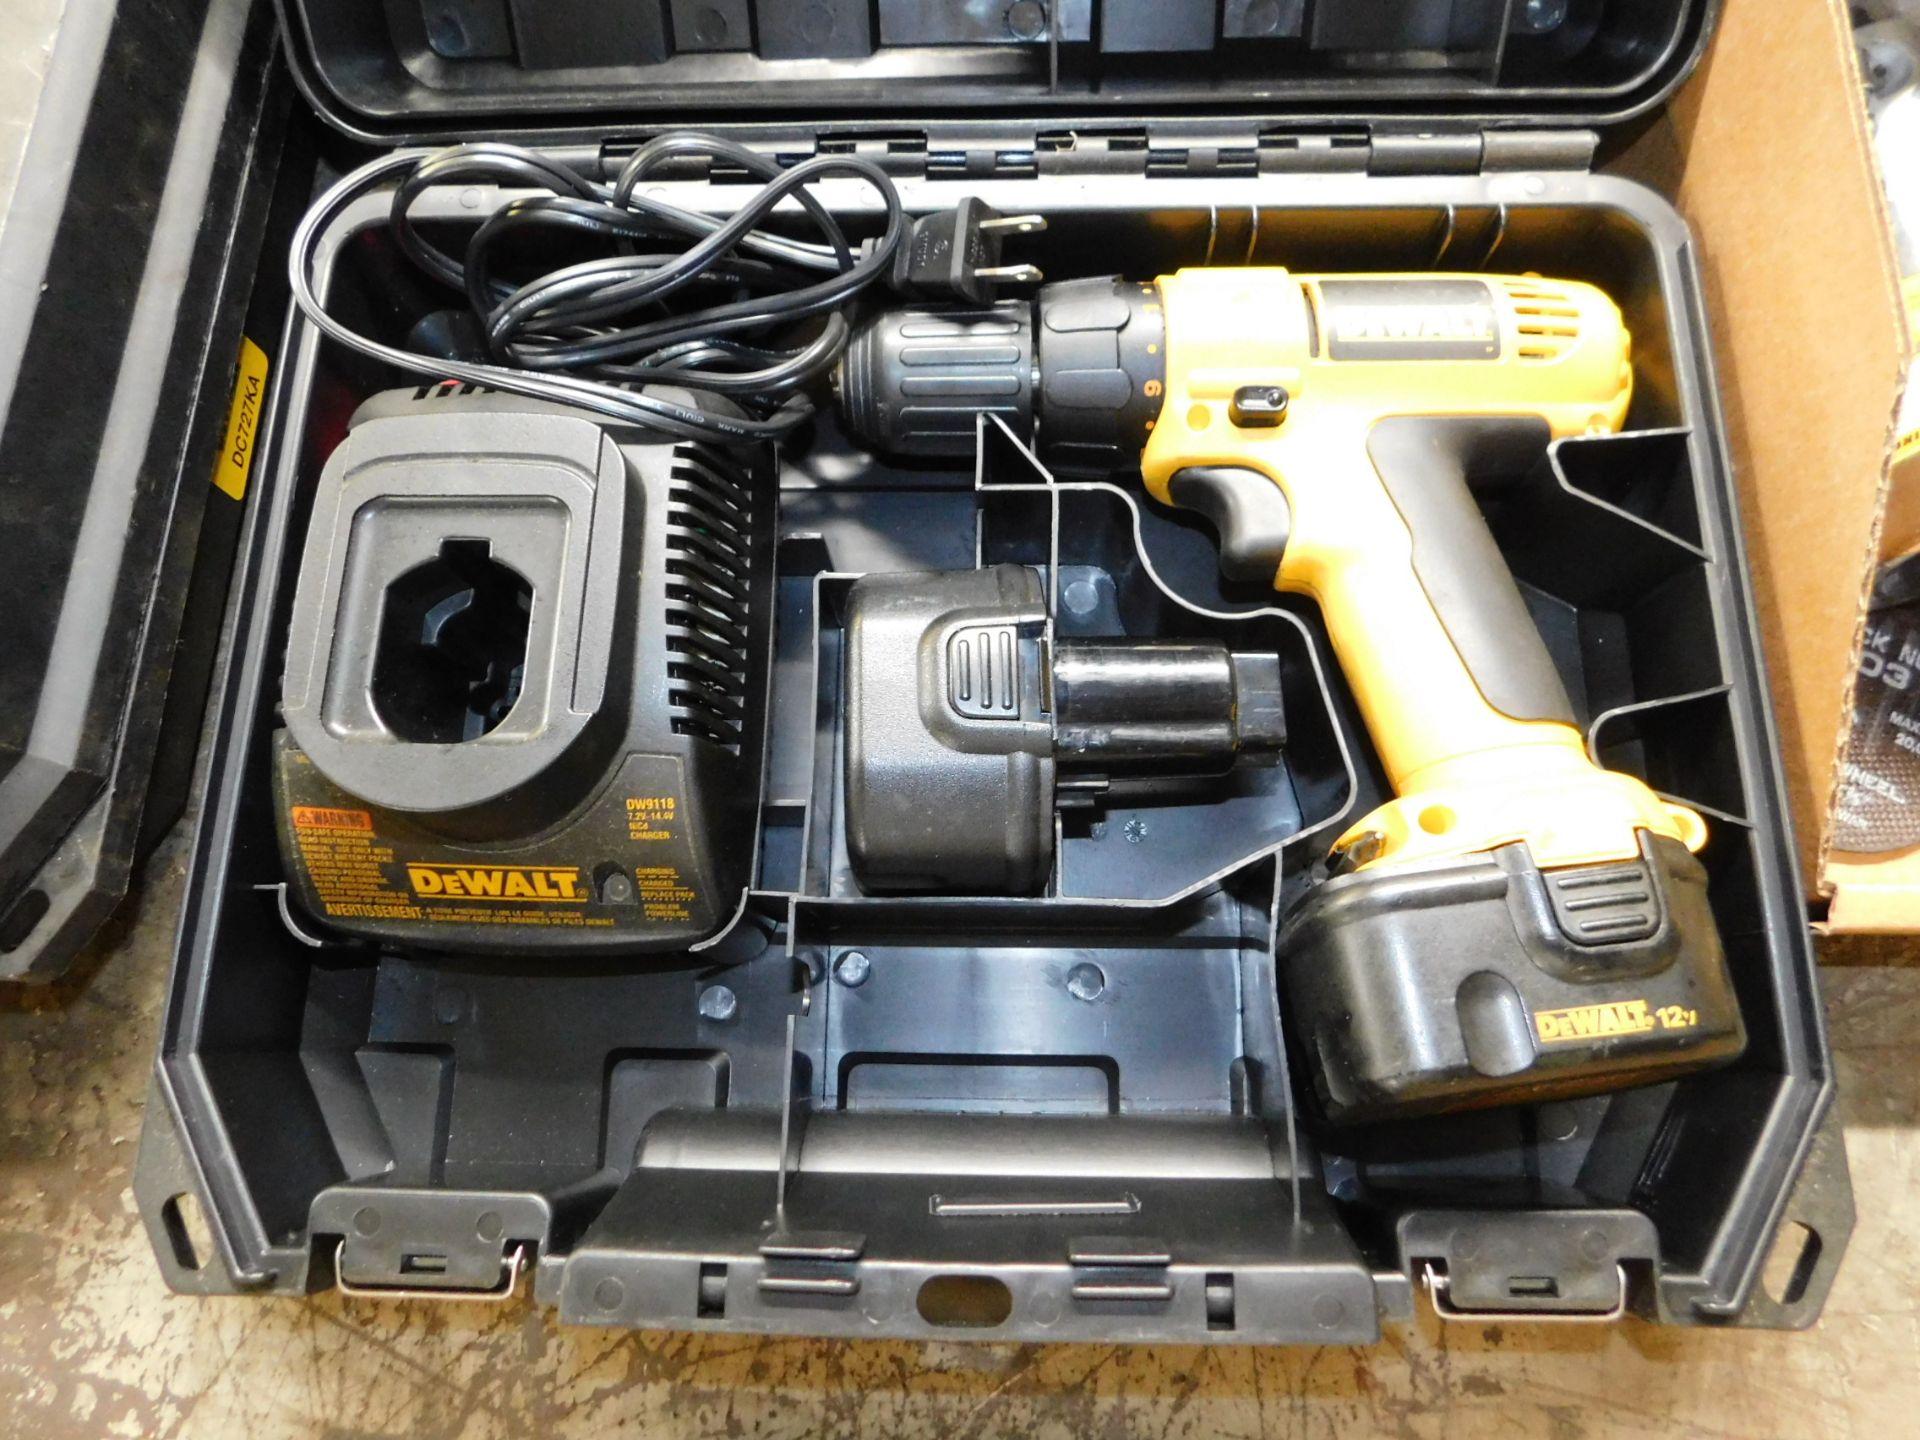 Dewalt 12V Cordless Drill with Charger and Case